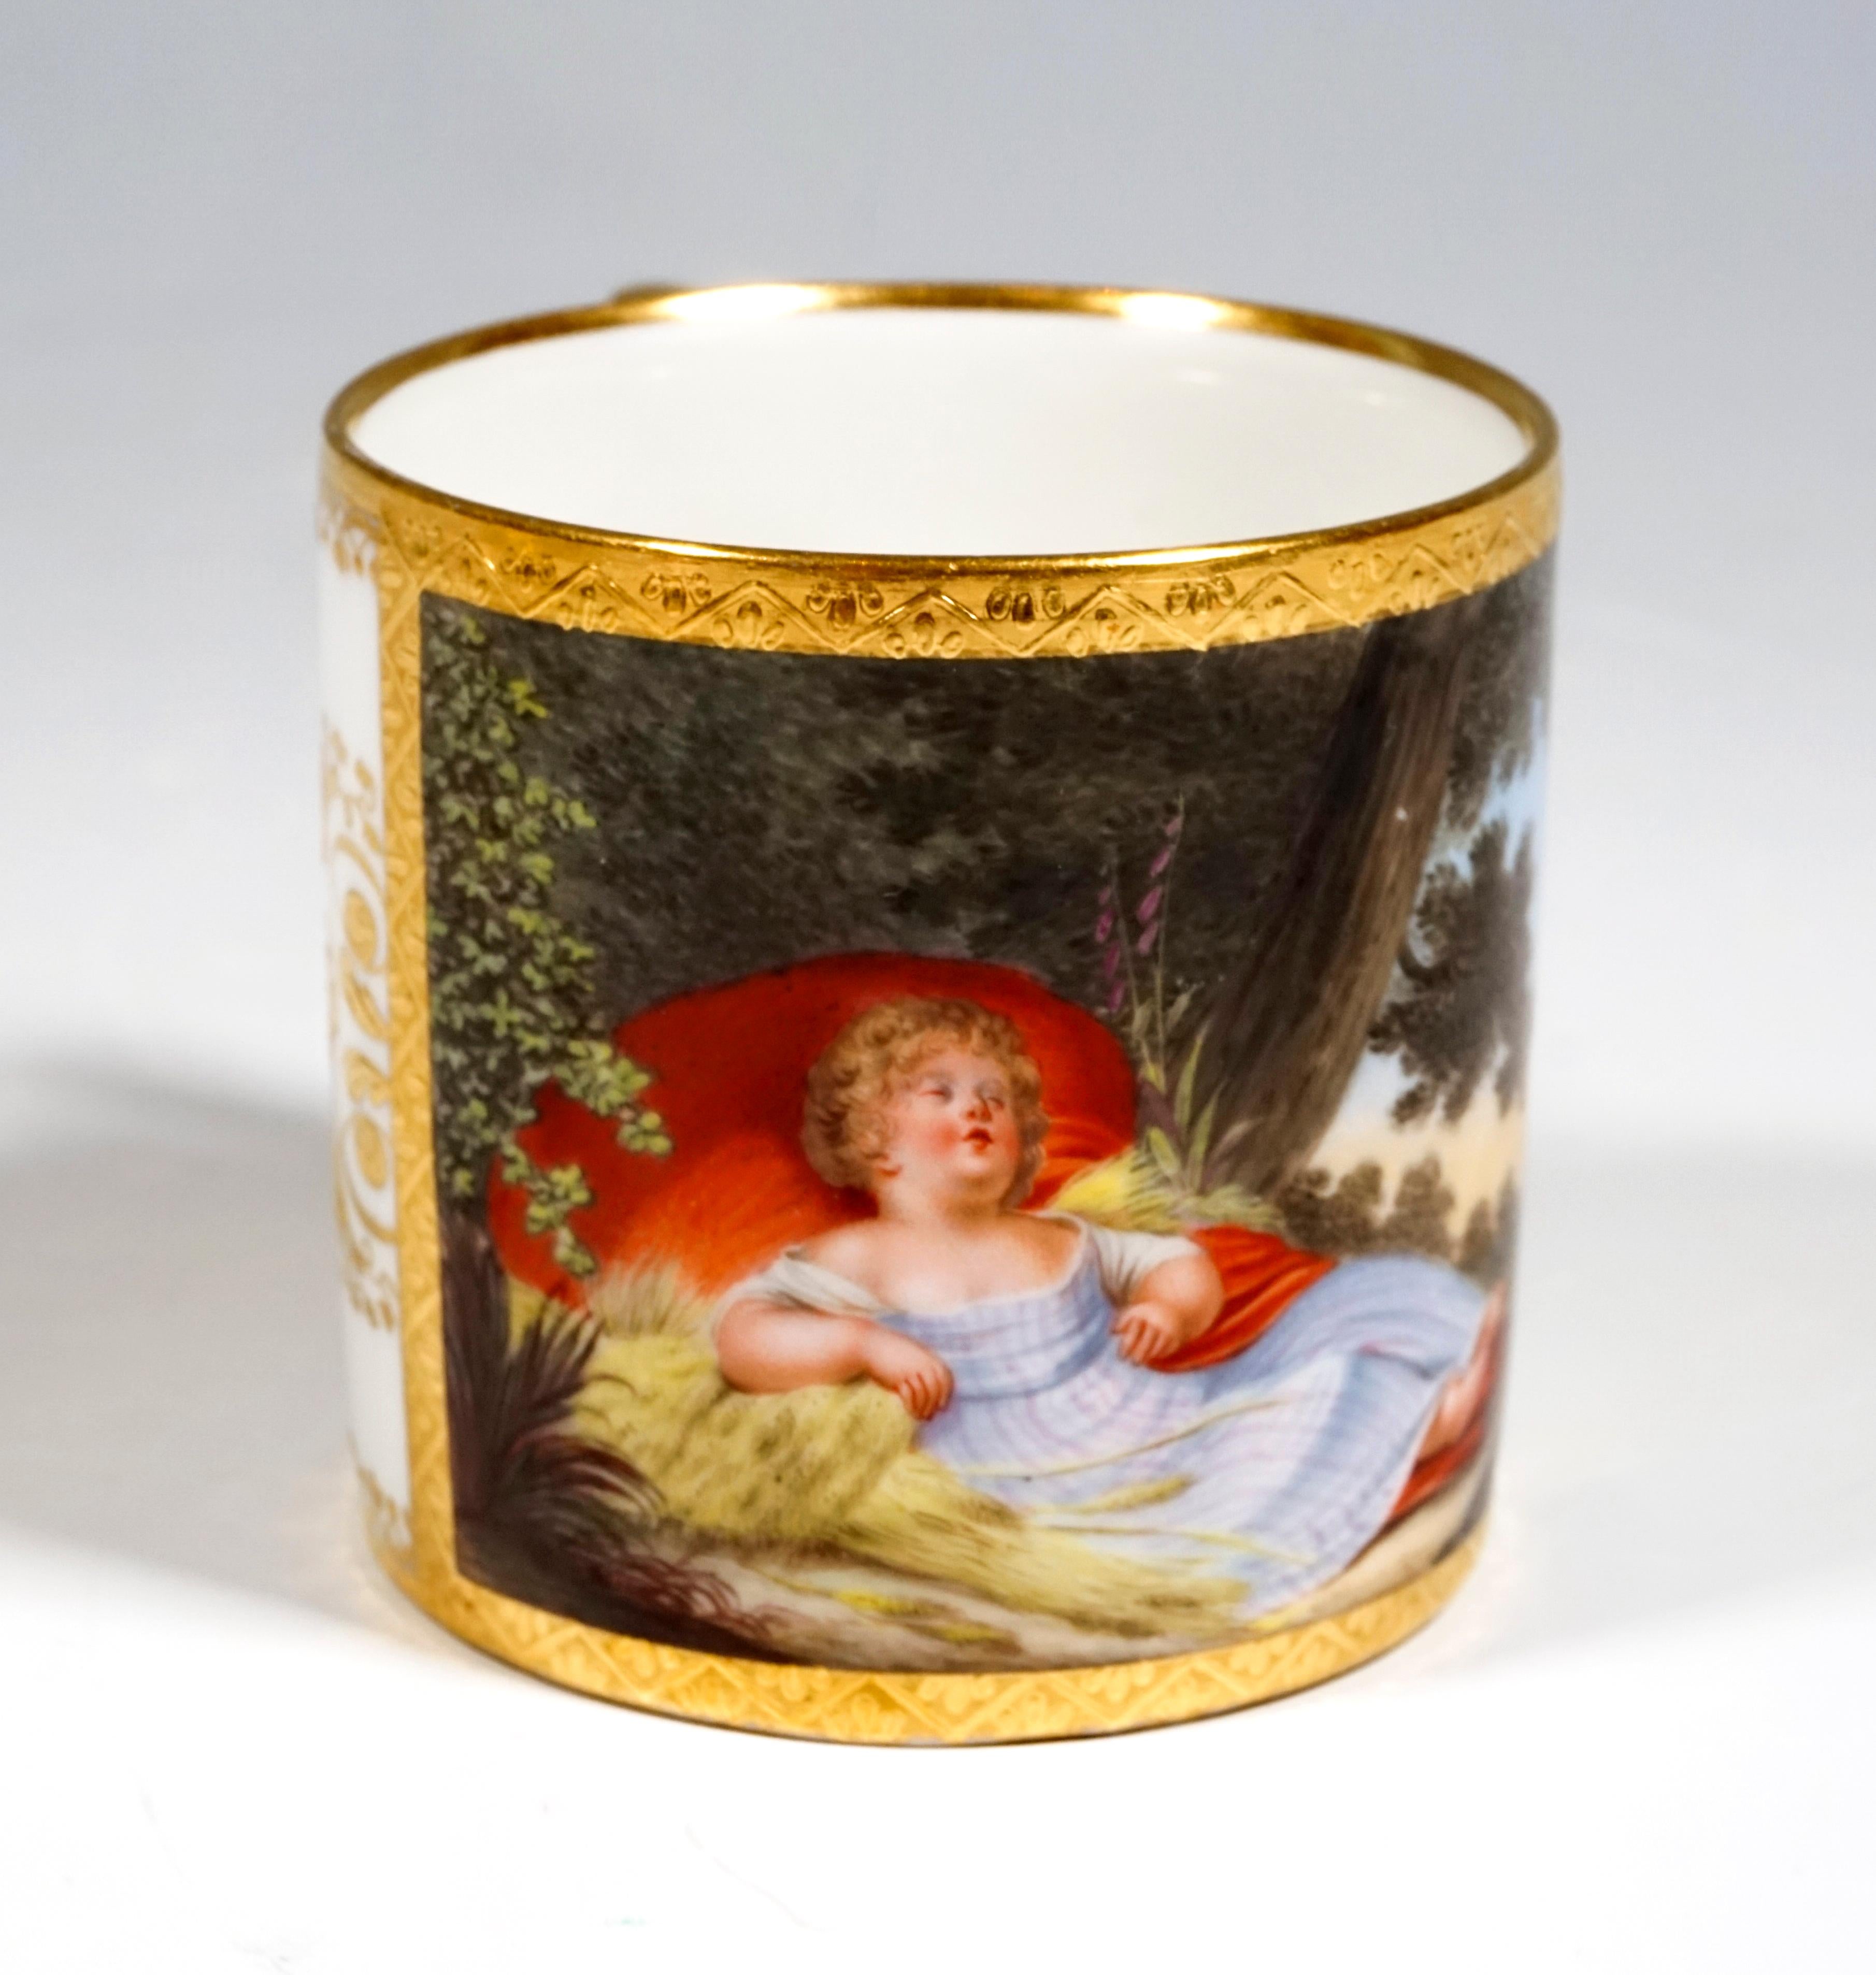 Romantic Viennese Imperial Porcelain Collecting Cup With Sleeping Girl, Sorgenthal, 1801